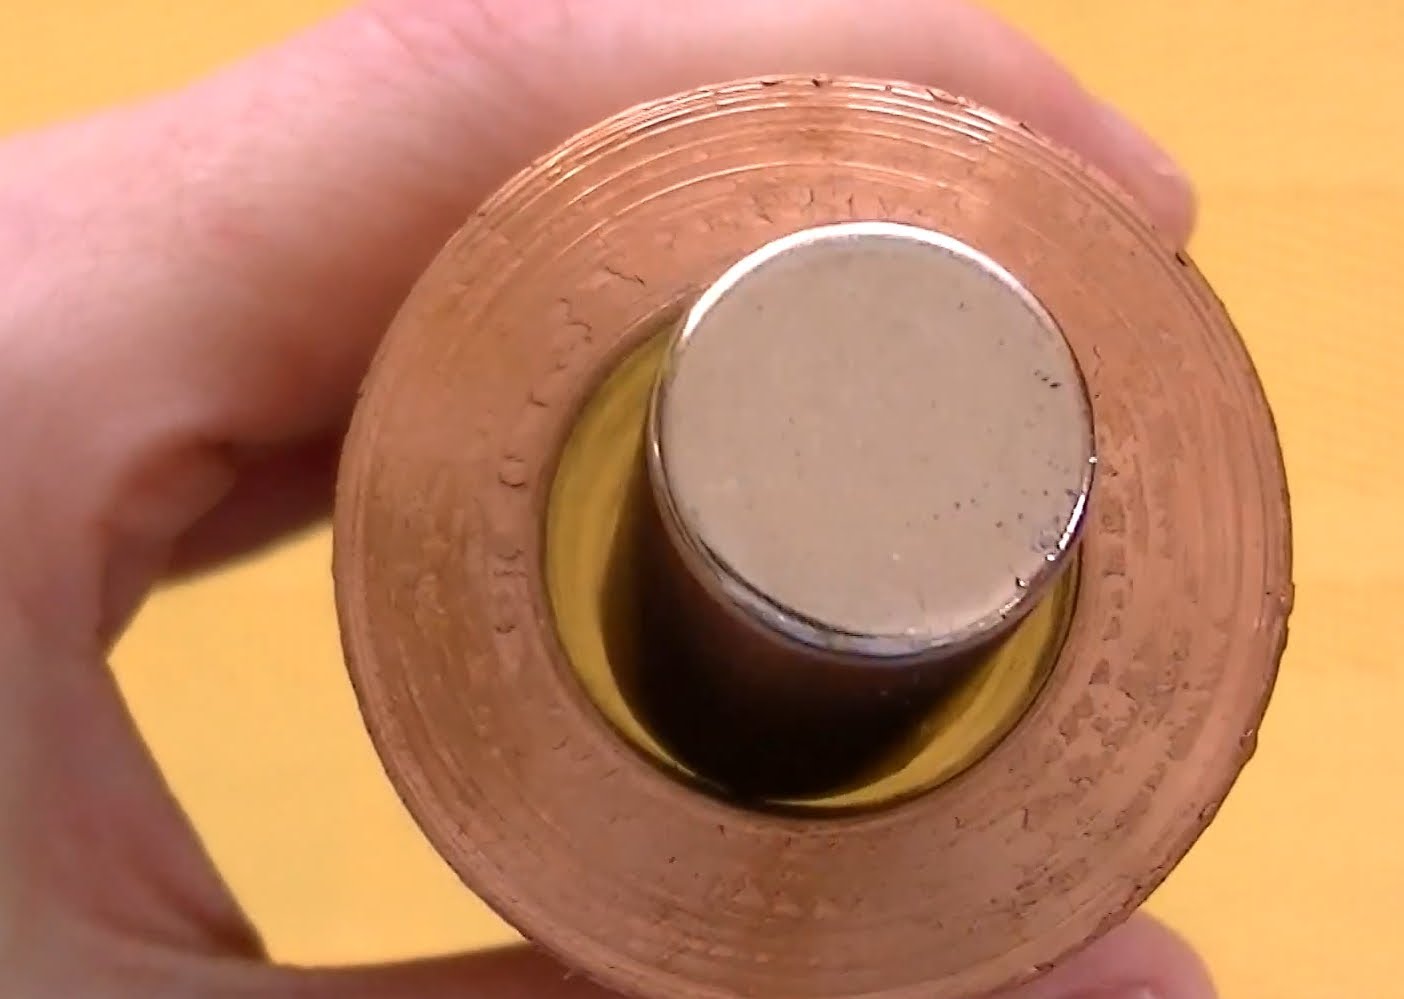 Magnet inside a Copper Tube and Lenz’s Law